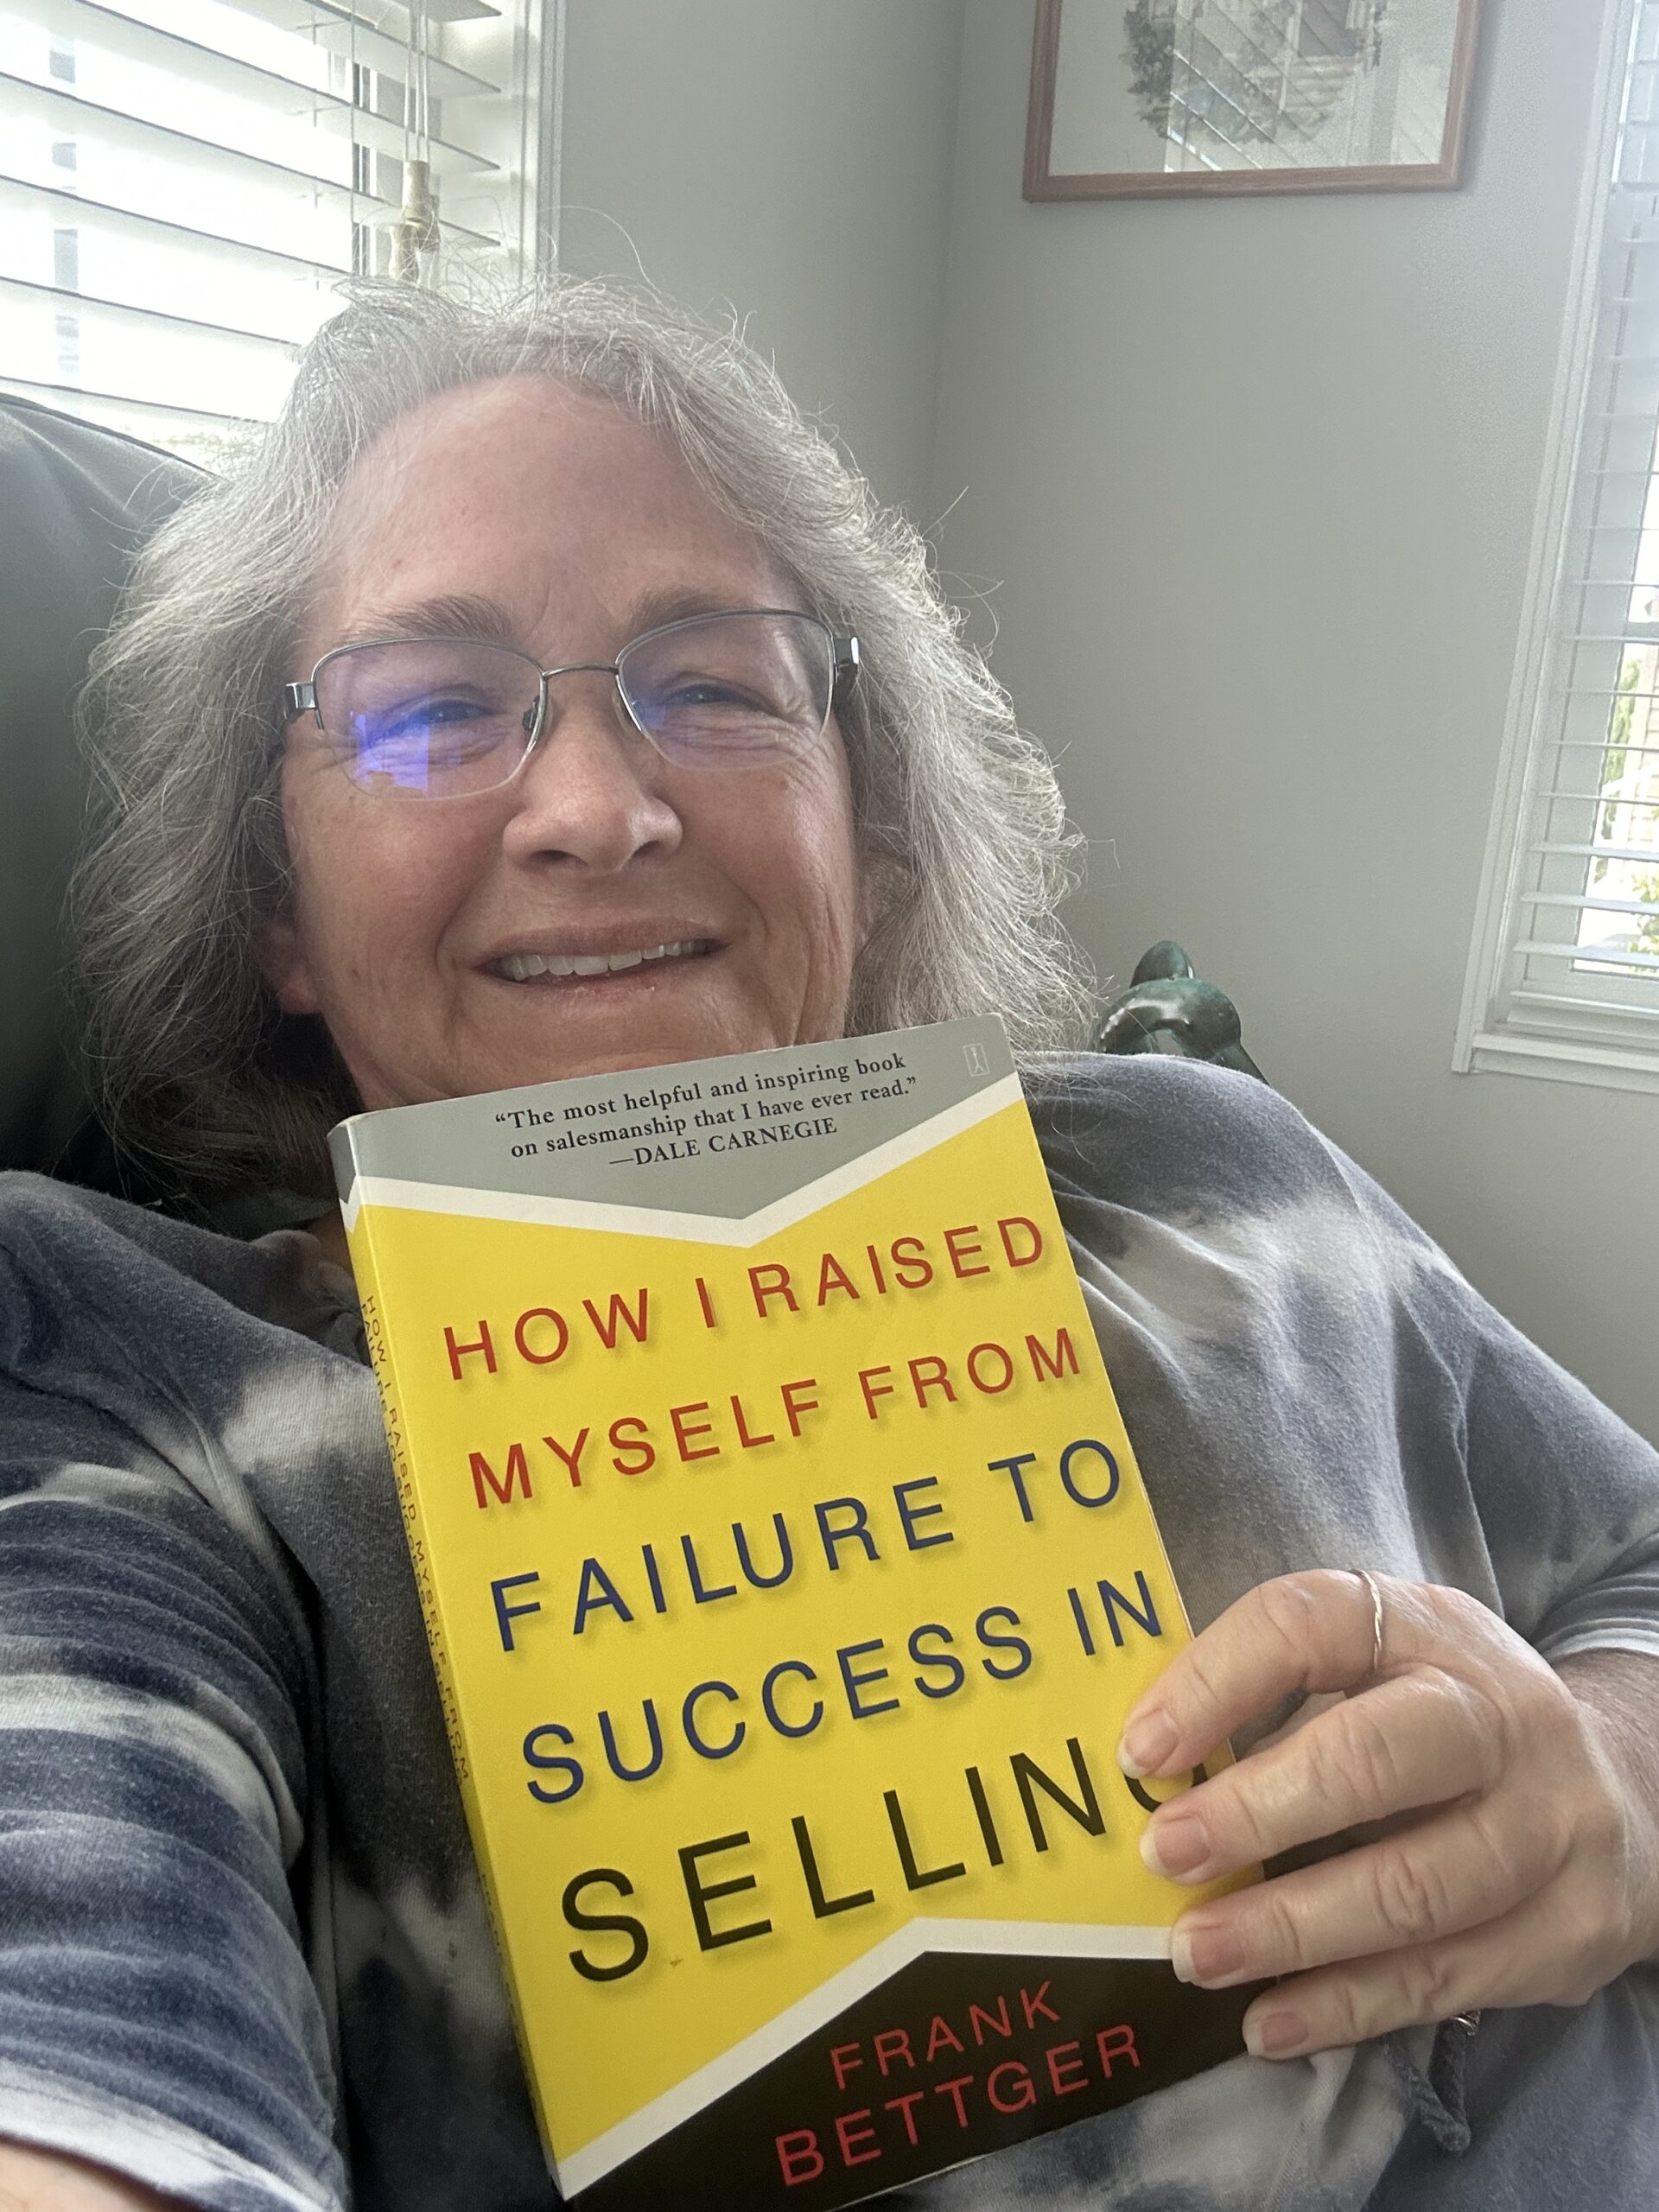 Amy smiling holding How I Raised Myself From Failure to Success In Selling by Frank Bettger.